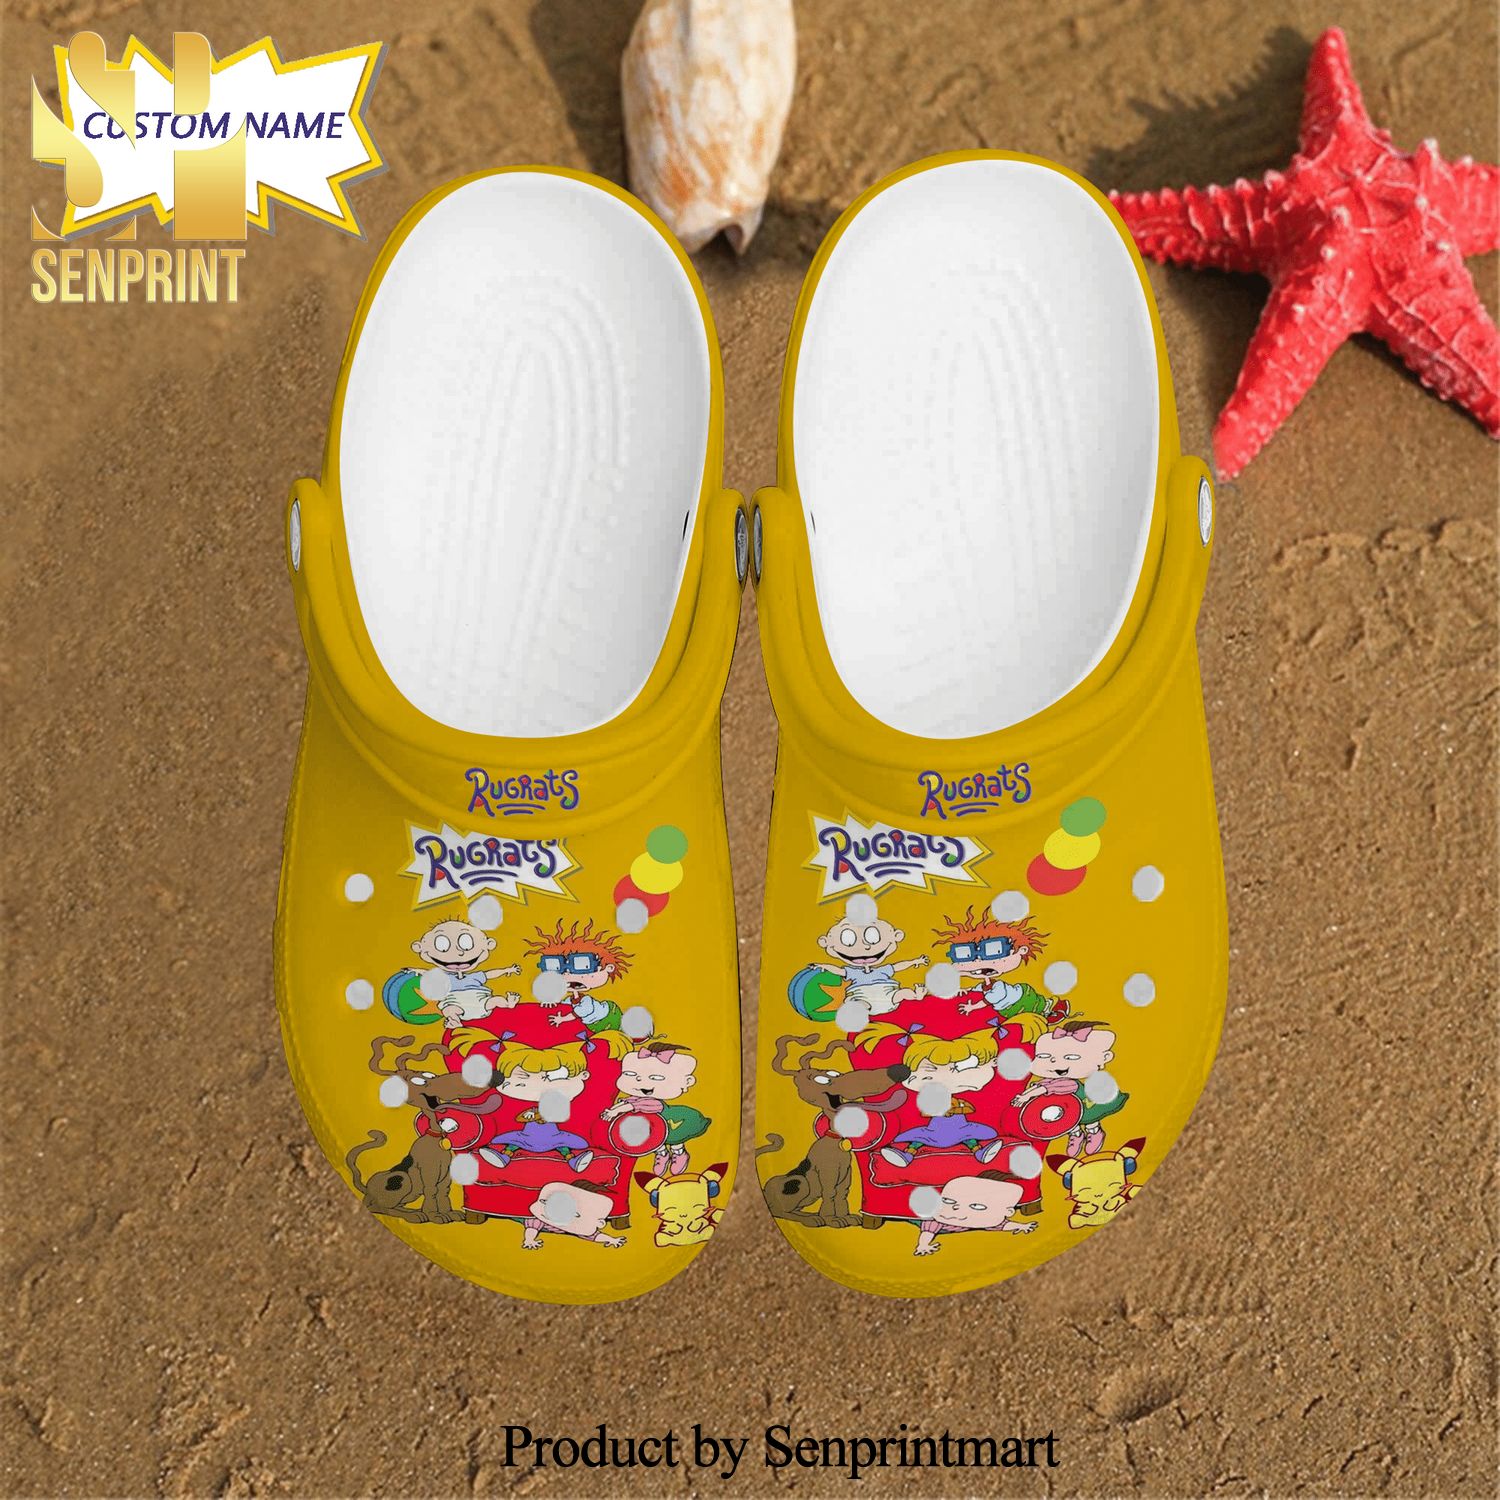 The Rugrats Comedy Tv Cartoon Your Name I Comfortable Classic Waterar All Over Printed Crocs Sandals